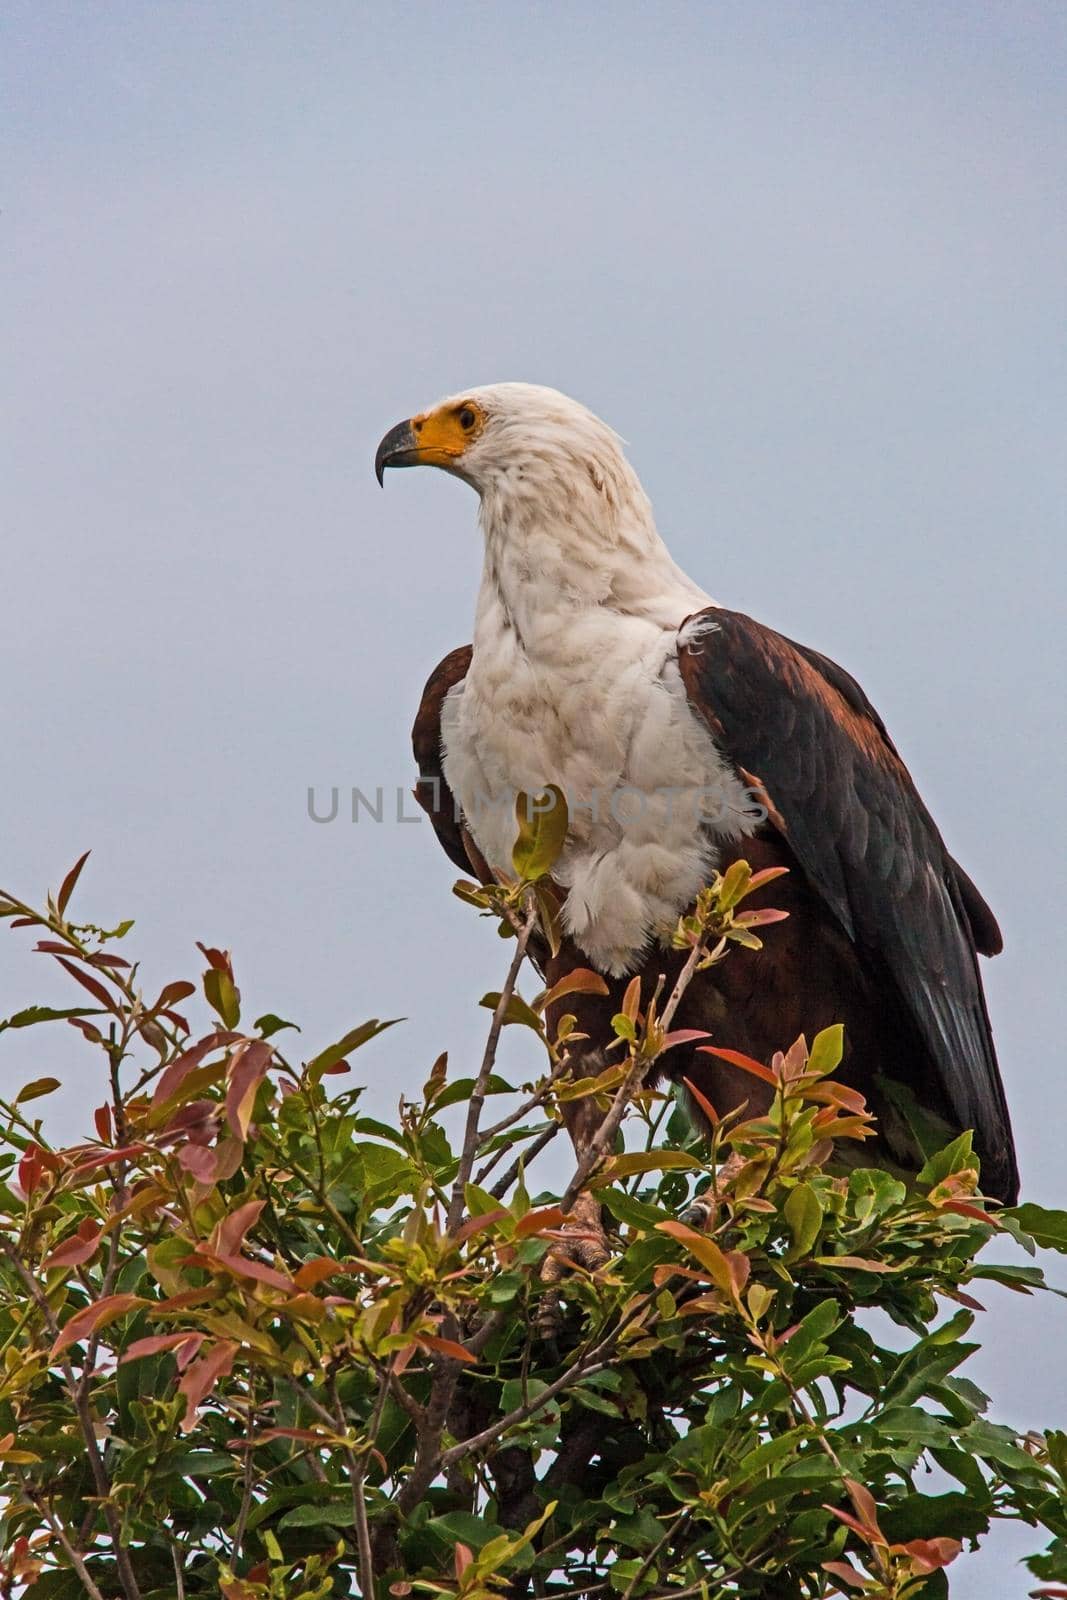 The African Fish Eagle (Haliaeetus vocifer) is an African icon.